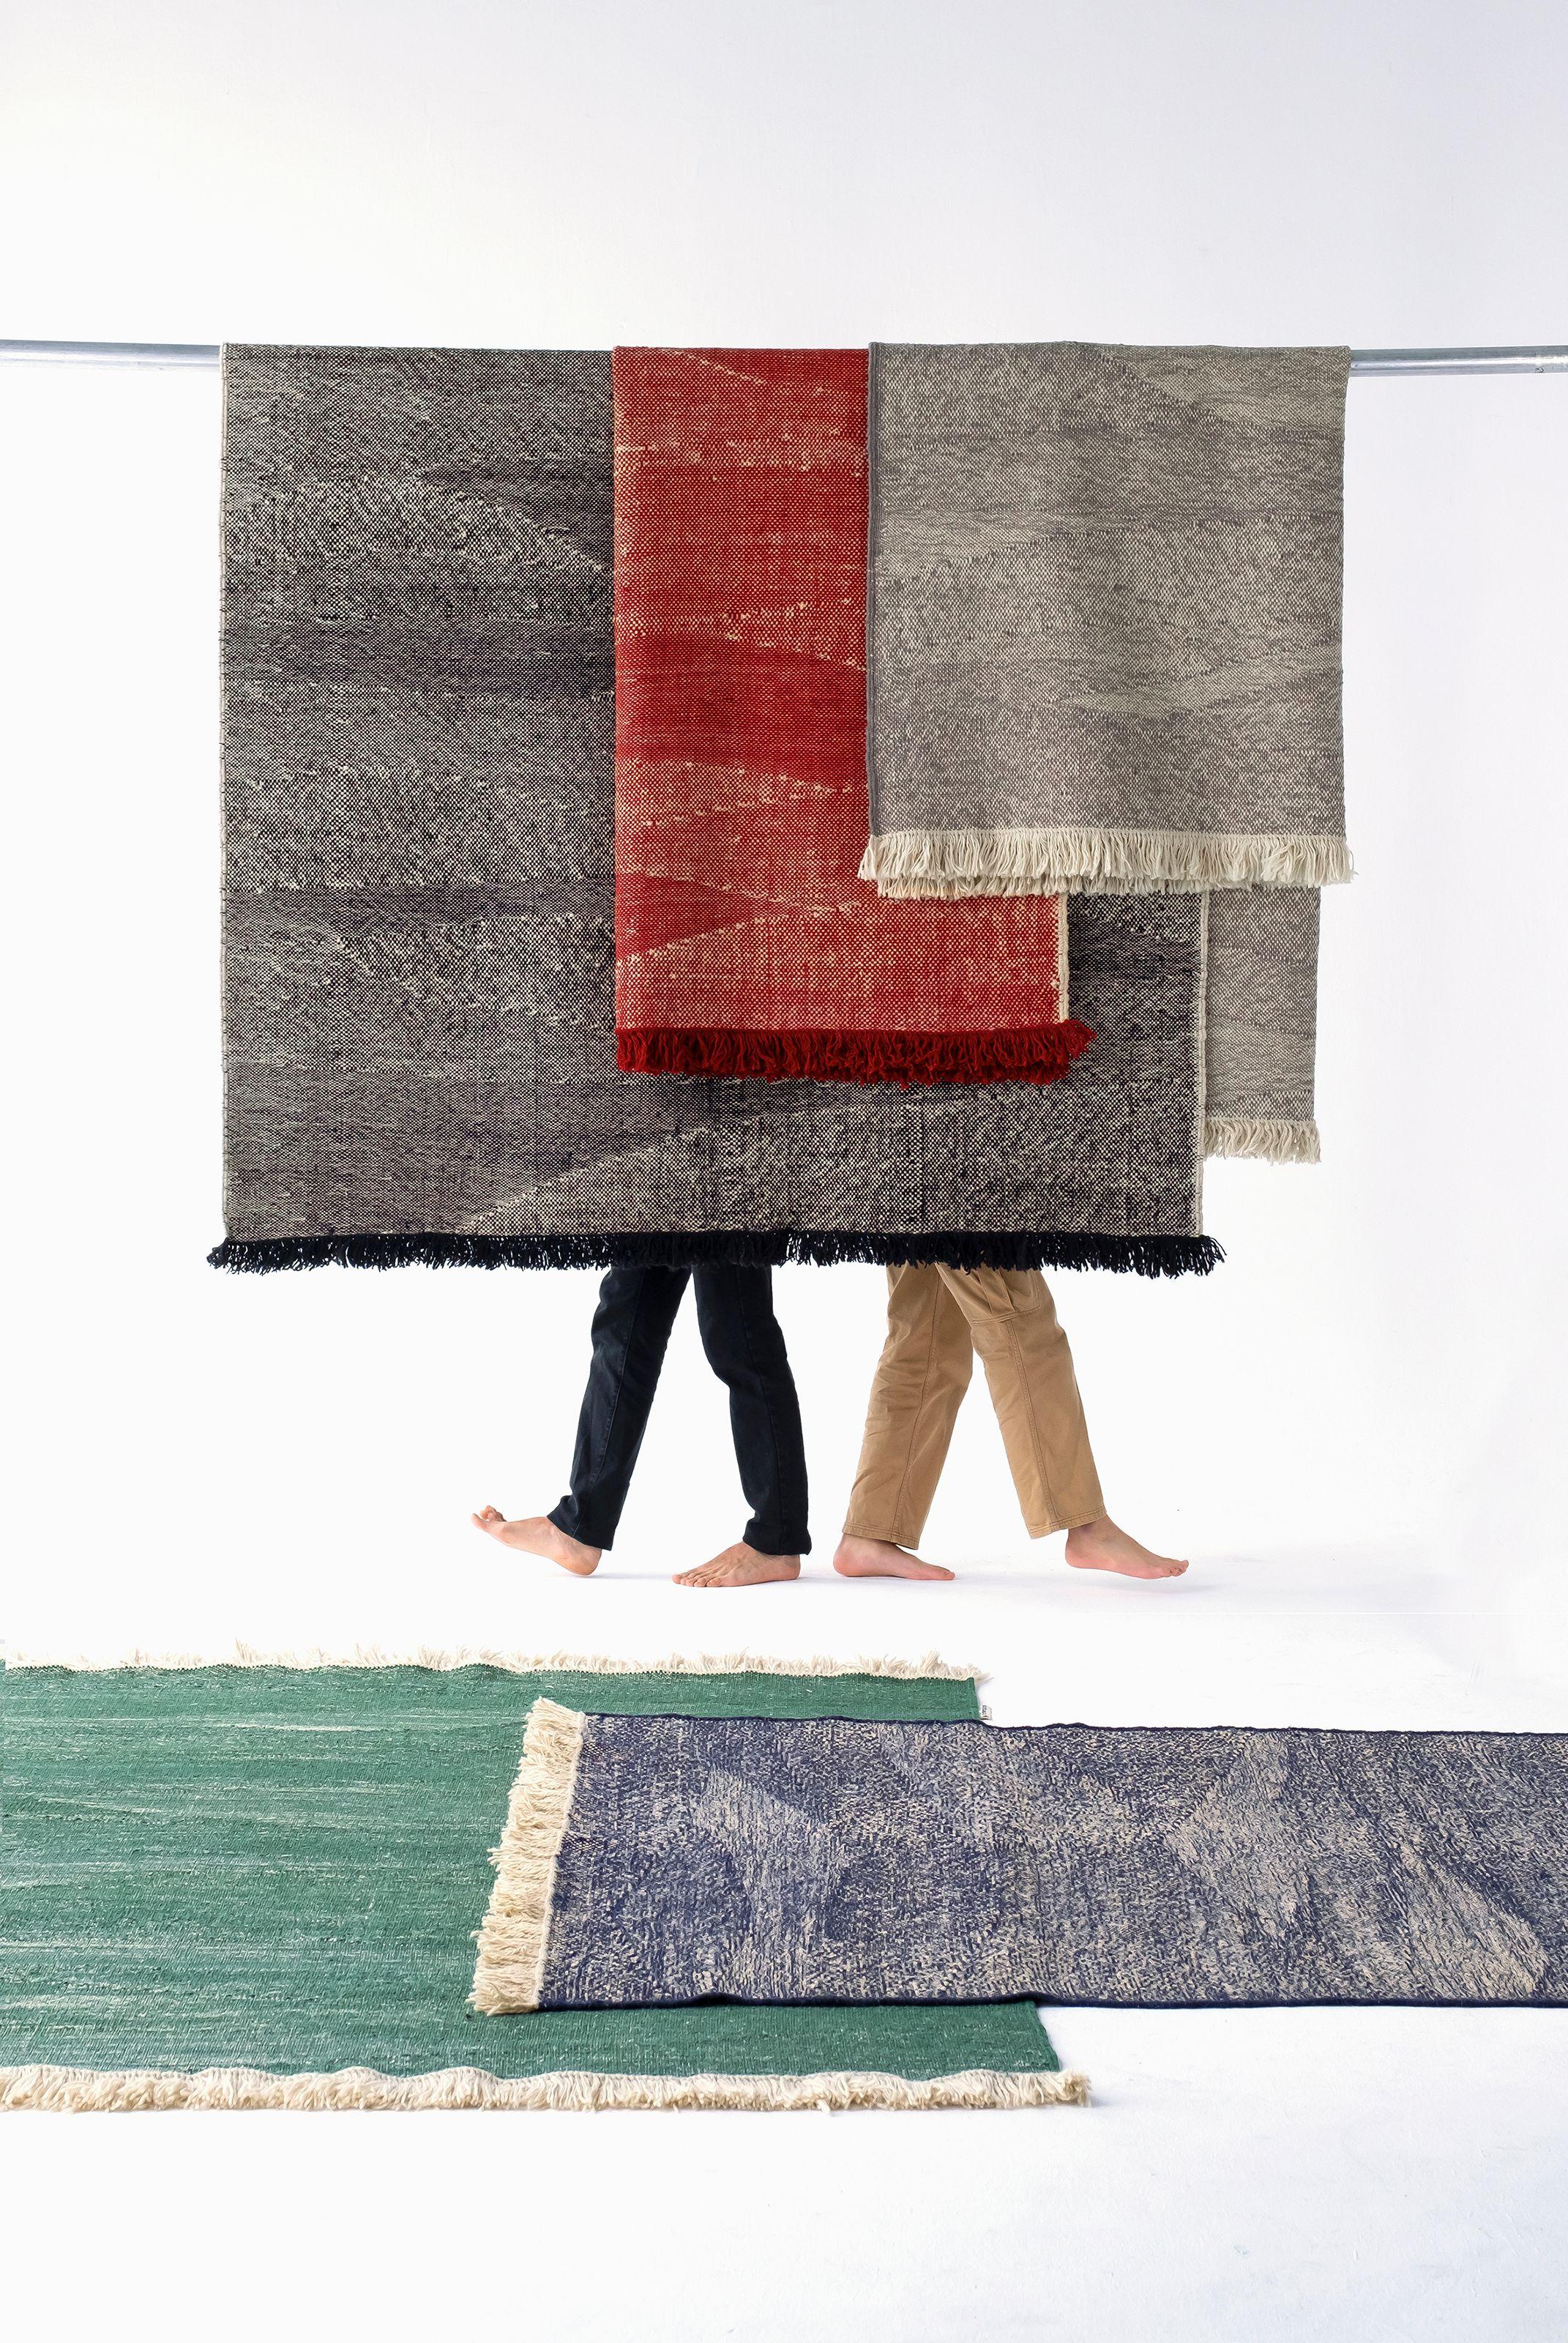 This collection is born from the persistent search for new approaches that the loom has to offer.

By combining the techniques used in kilims and typical dhurries, we have created a unique set of textures and rhythm through the variation and